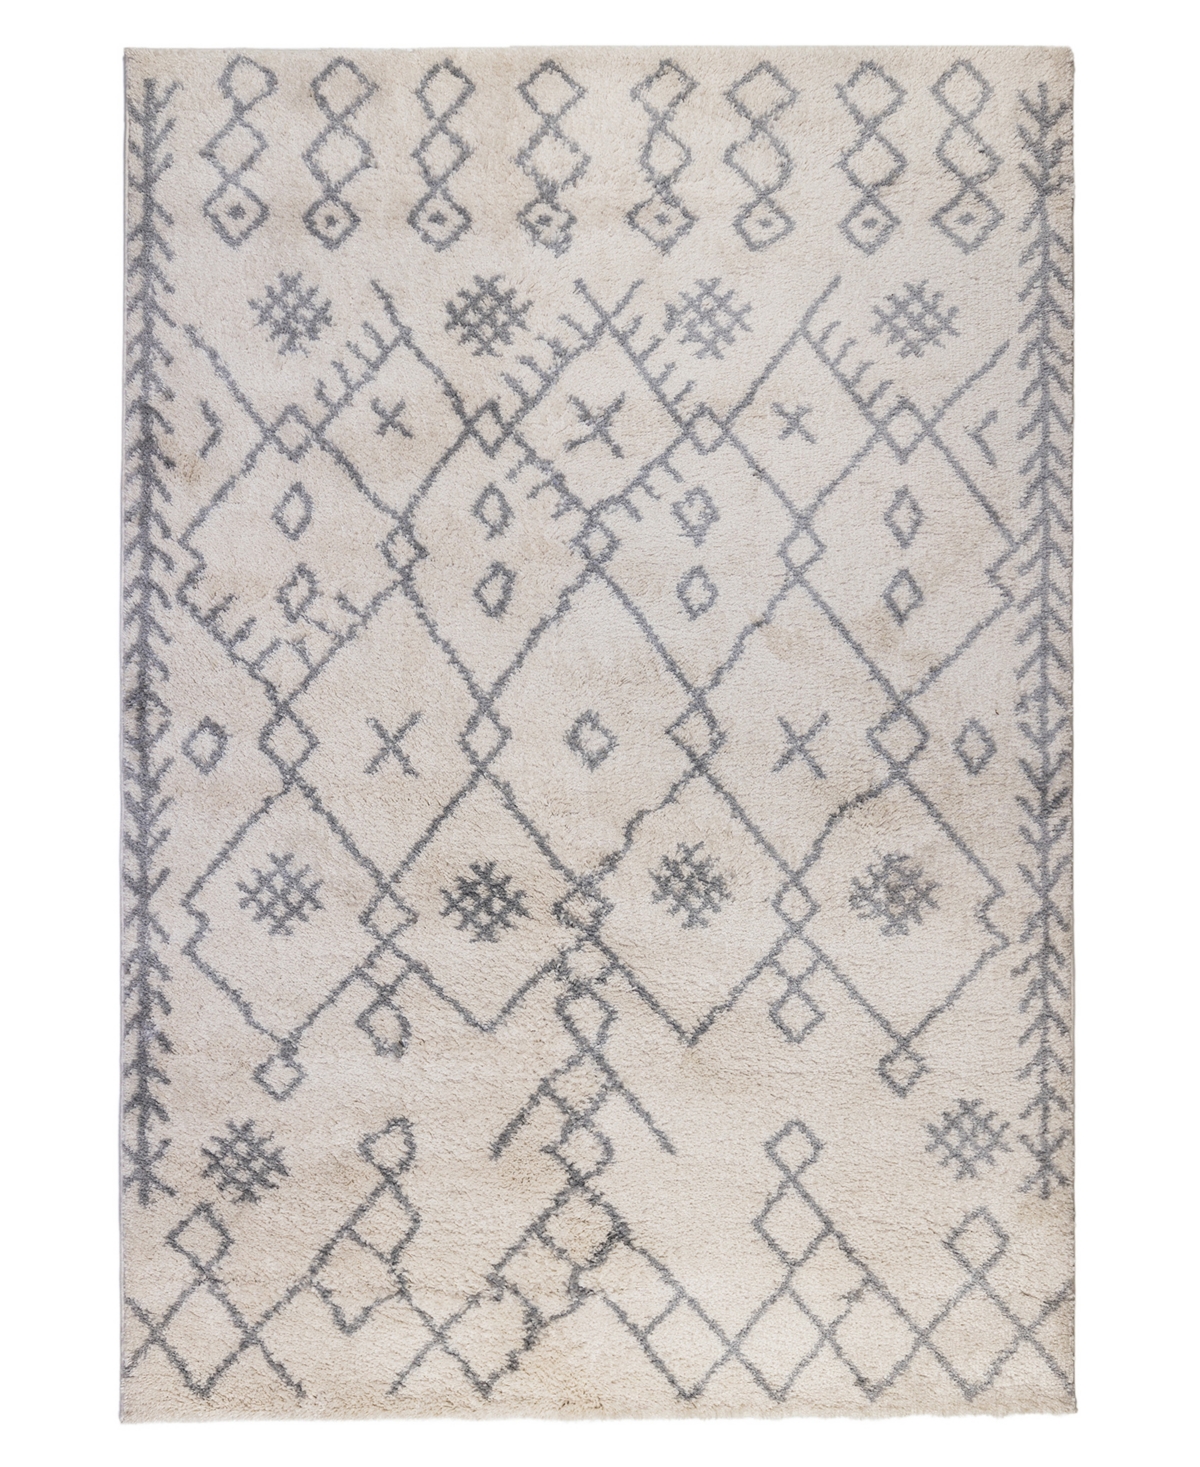 Amer Rugs Asp6 7'6" X 9'6" Area Rug In Ivory/gray